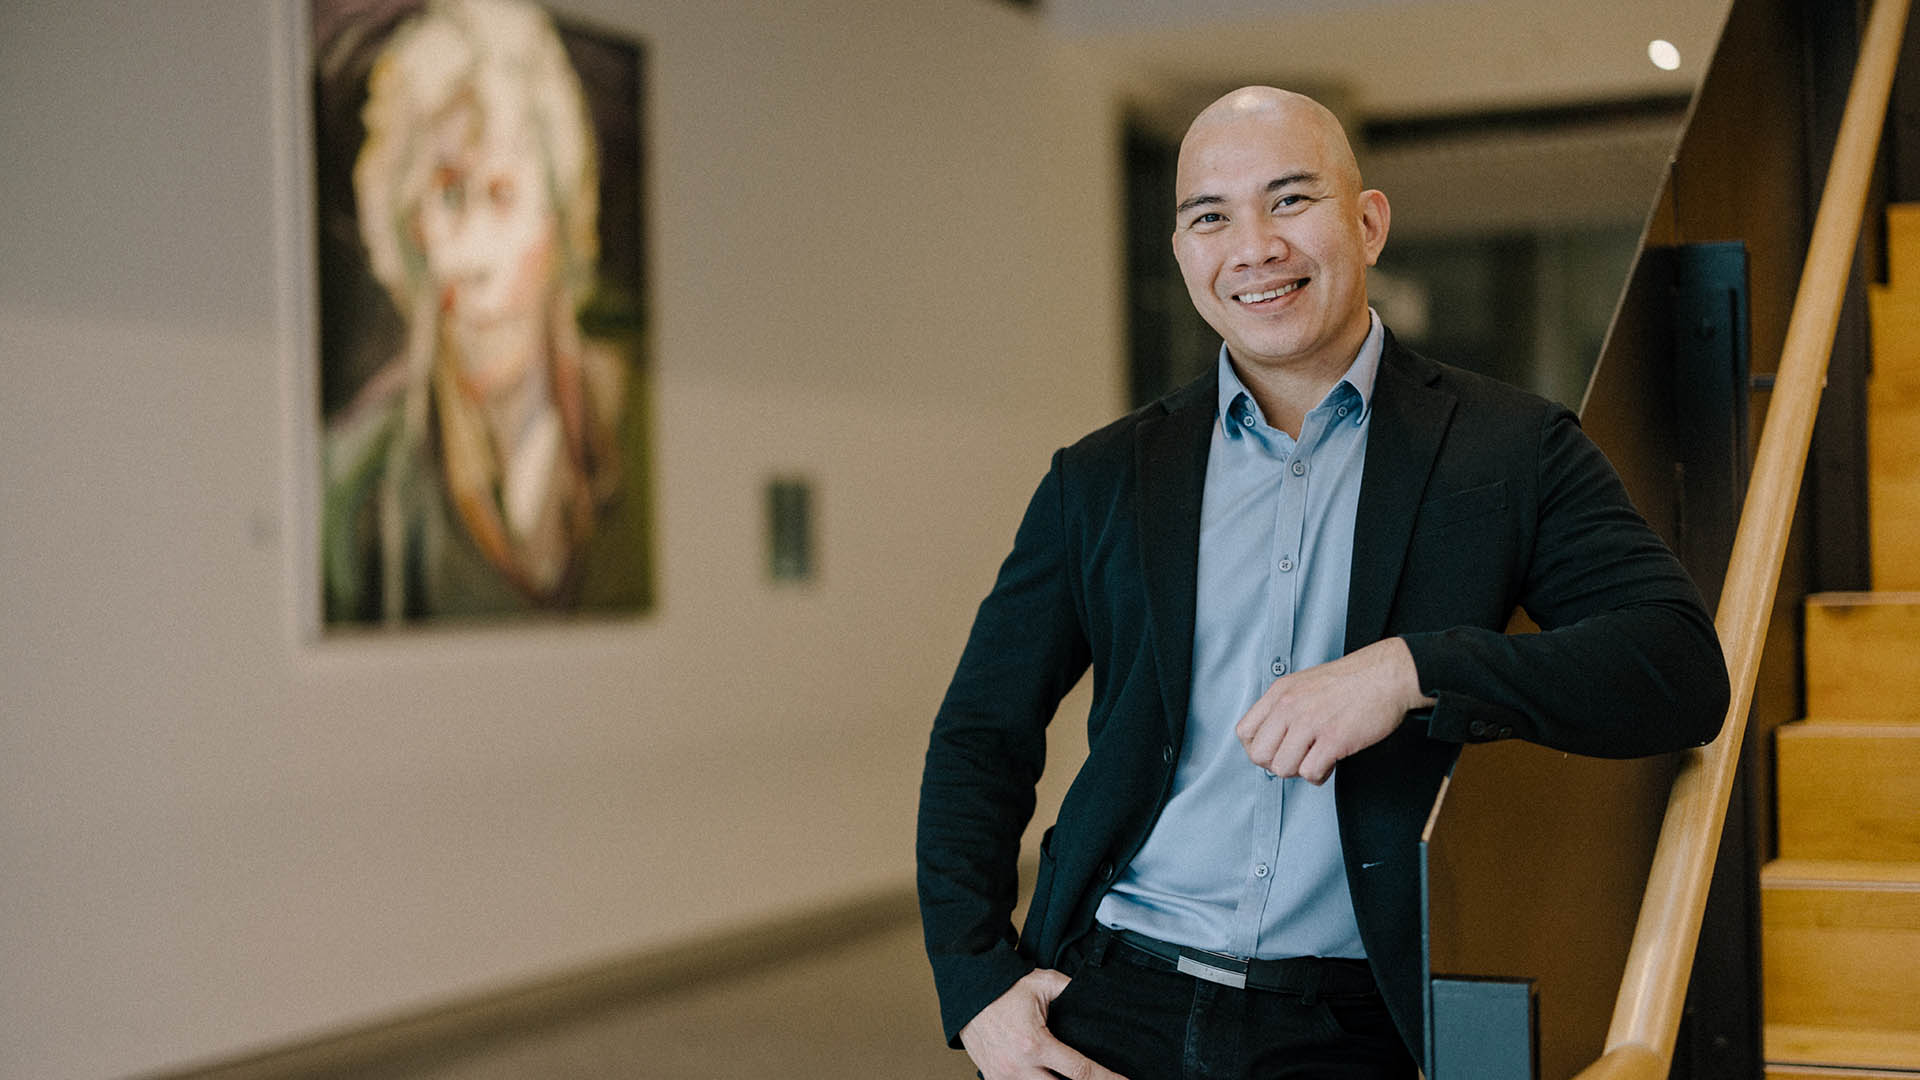 Dr Yves Saint James Aquino has been named as one of Australia’s best emerging thinkers and communicators, being selected for the 2023 ABC TOP 5 Media Residency Program – Humanities.